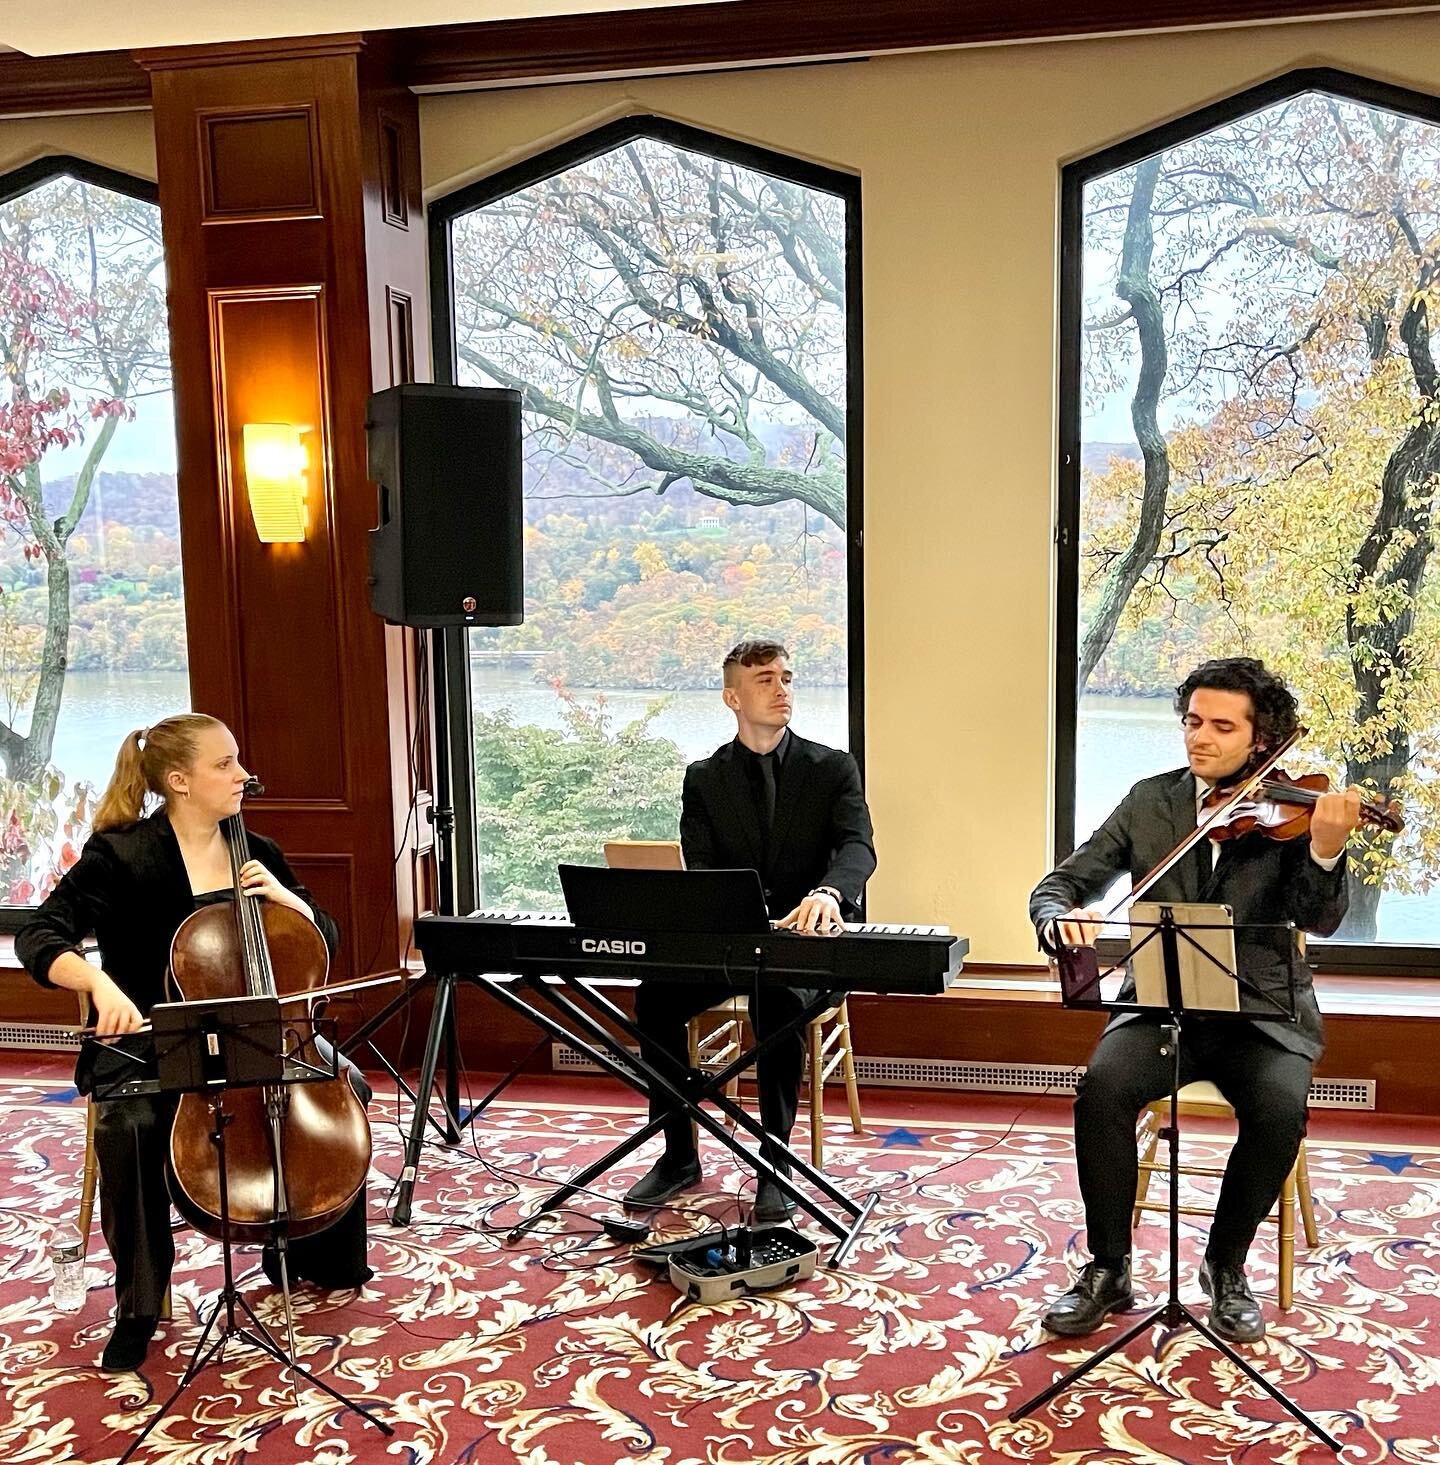 Magnificent wedding performance at @thethayerhotel
🎻✨
&lsquo;
&lsquo;
&lsquo;
#weddingmusicians #weddingmusic #nycwedding #nycweddingplanner #nycweddings #nycweddingvenue #nywedding #nyweddings #nyweddingplanner #nycmusicians #nymusic